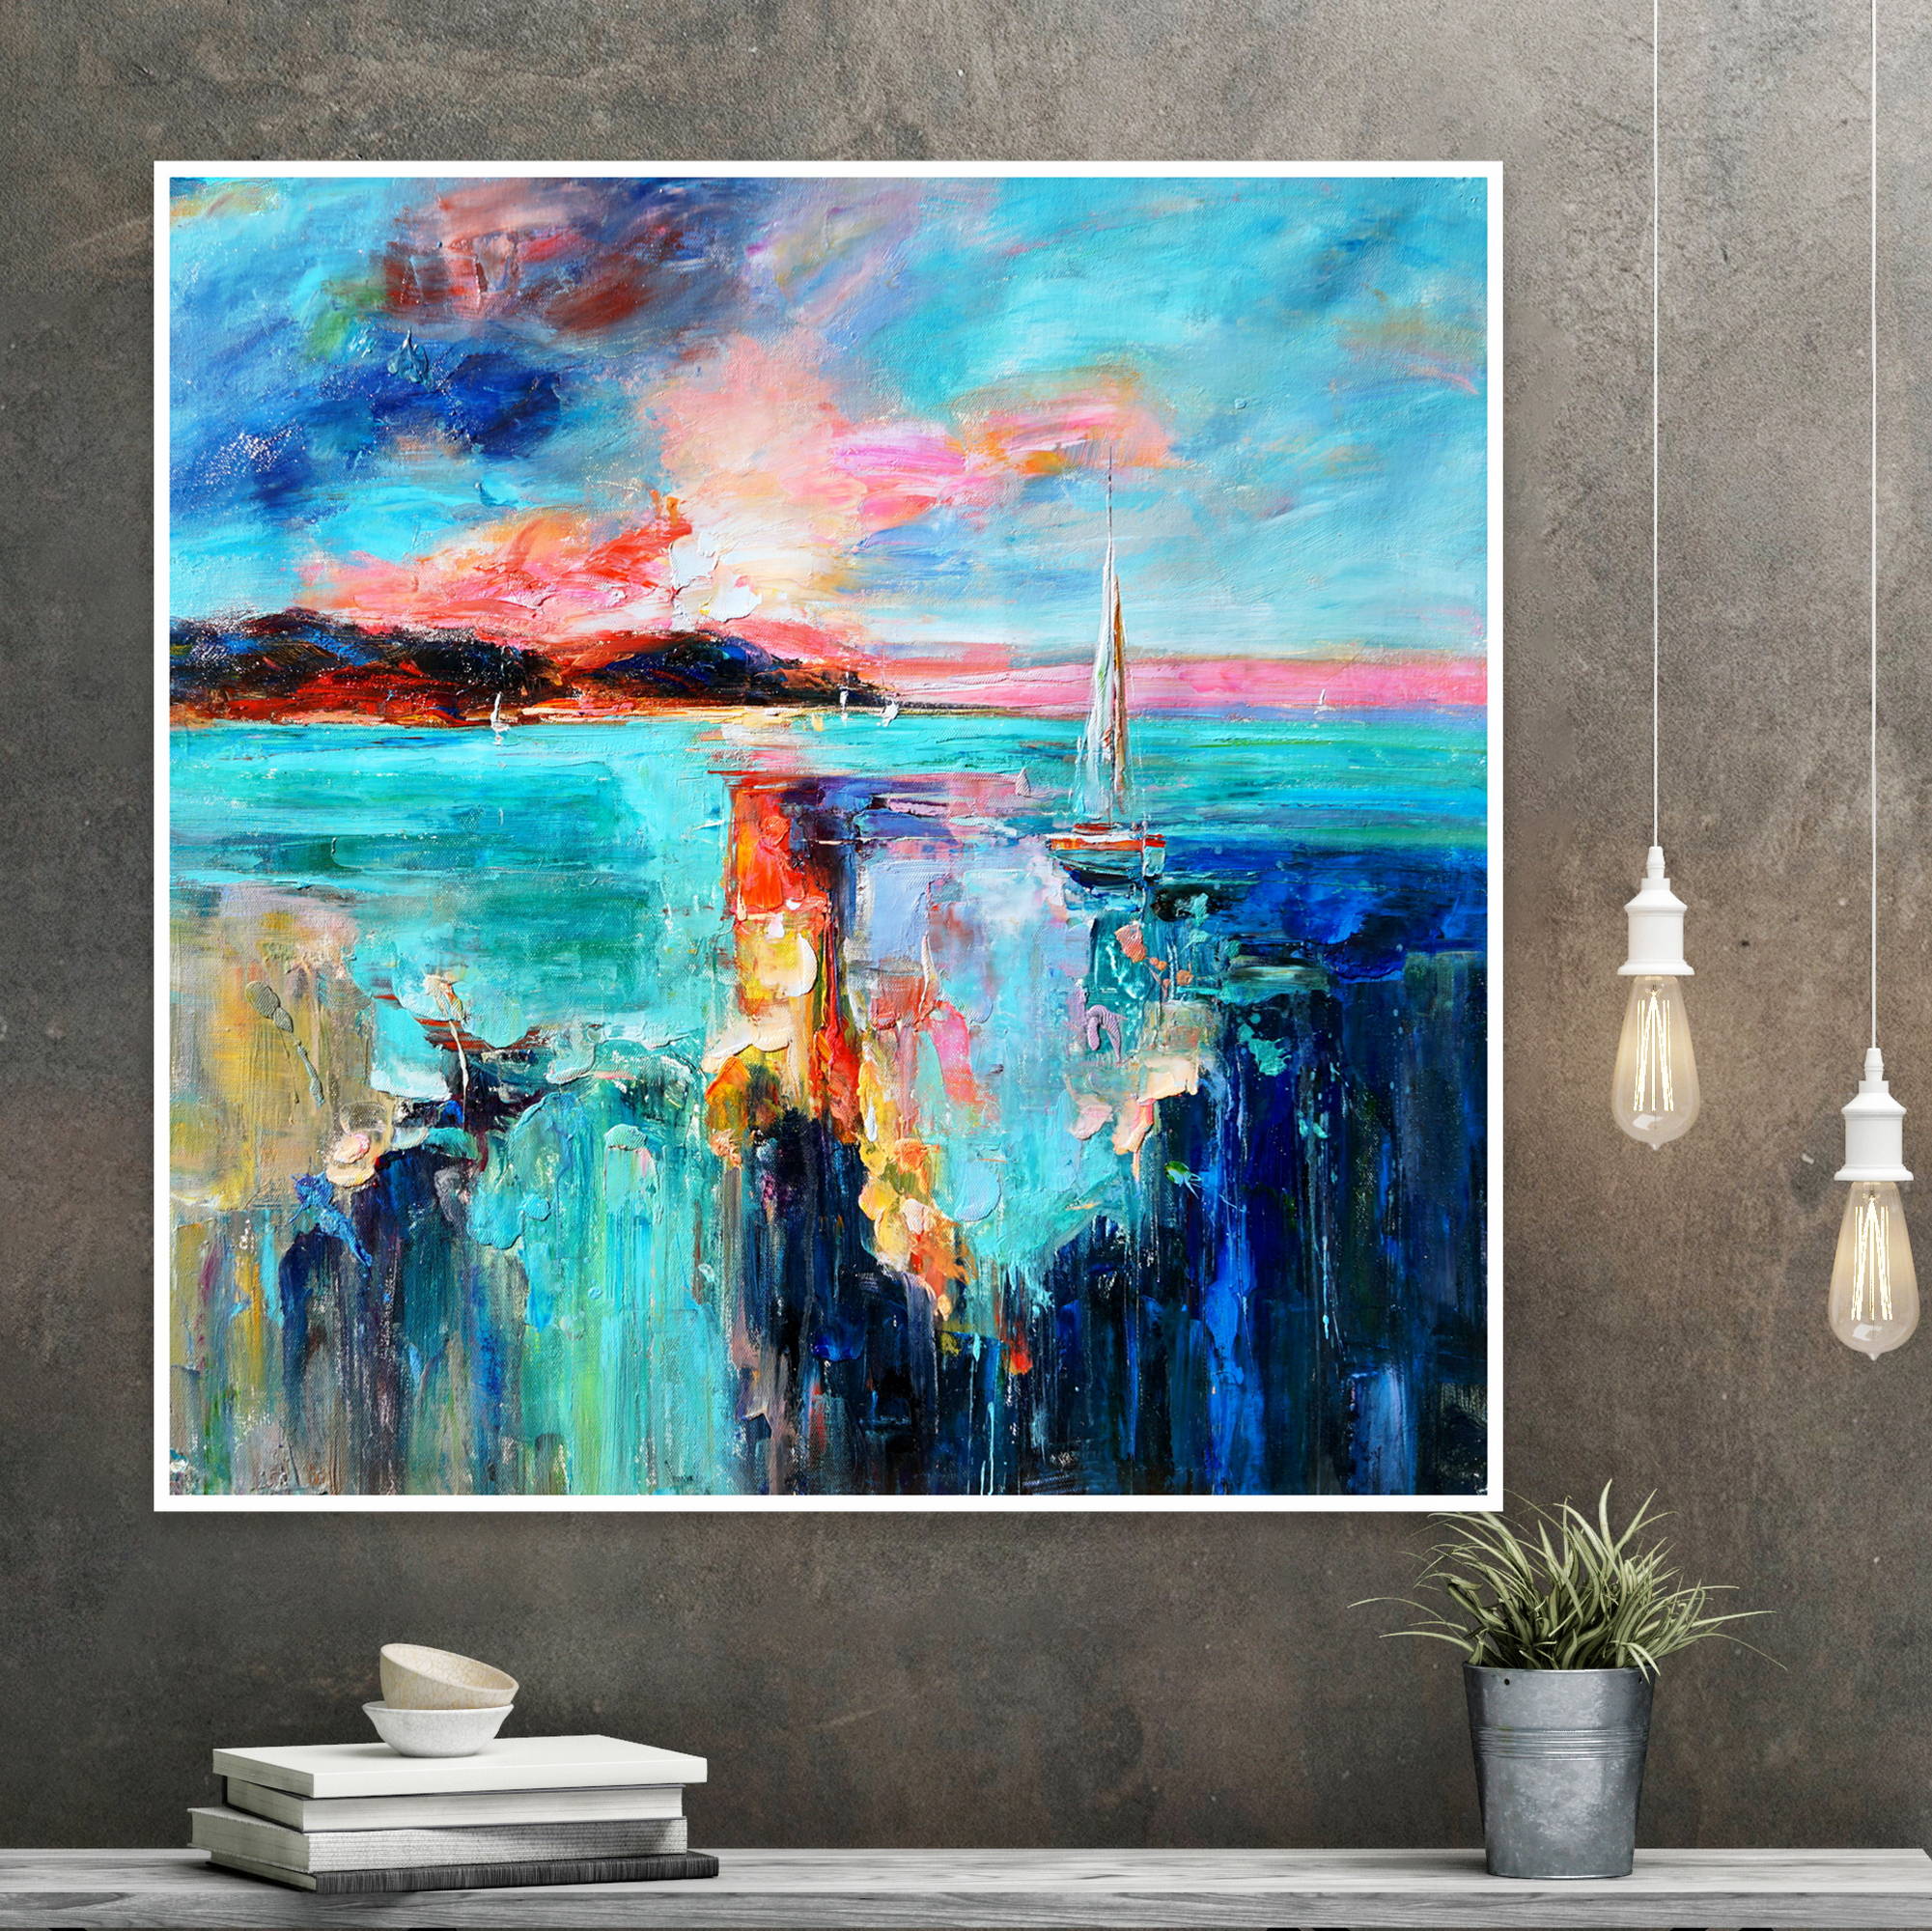 Abstract painting Marina at Sunset Bright colors 60x60cm